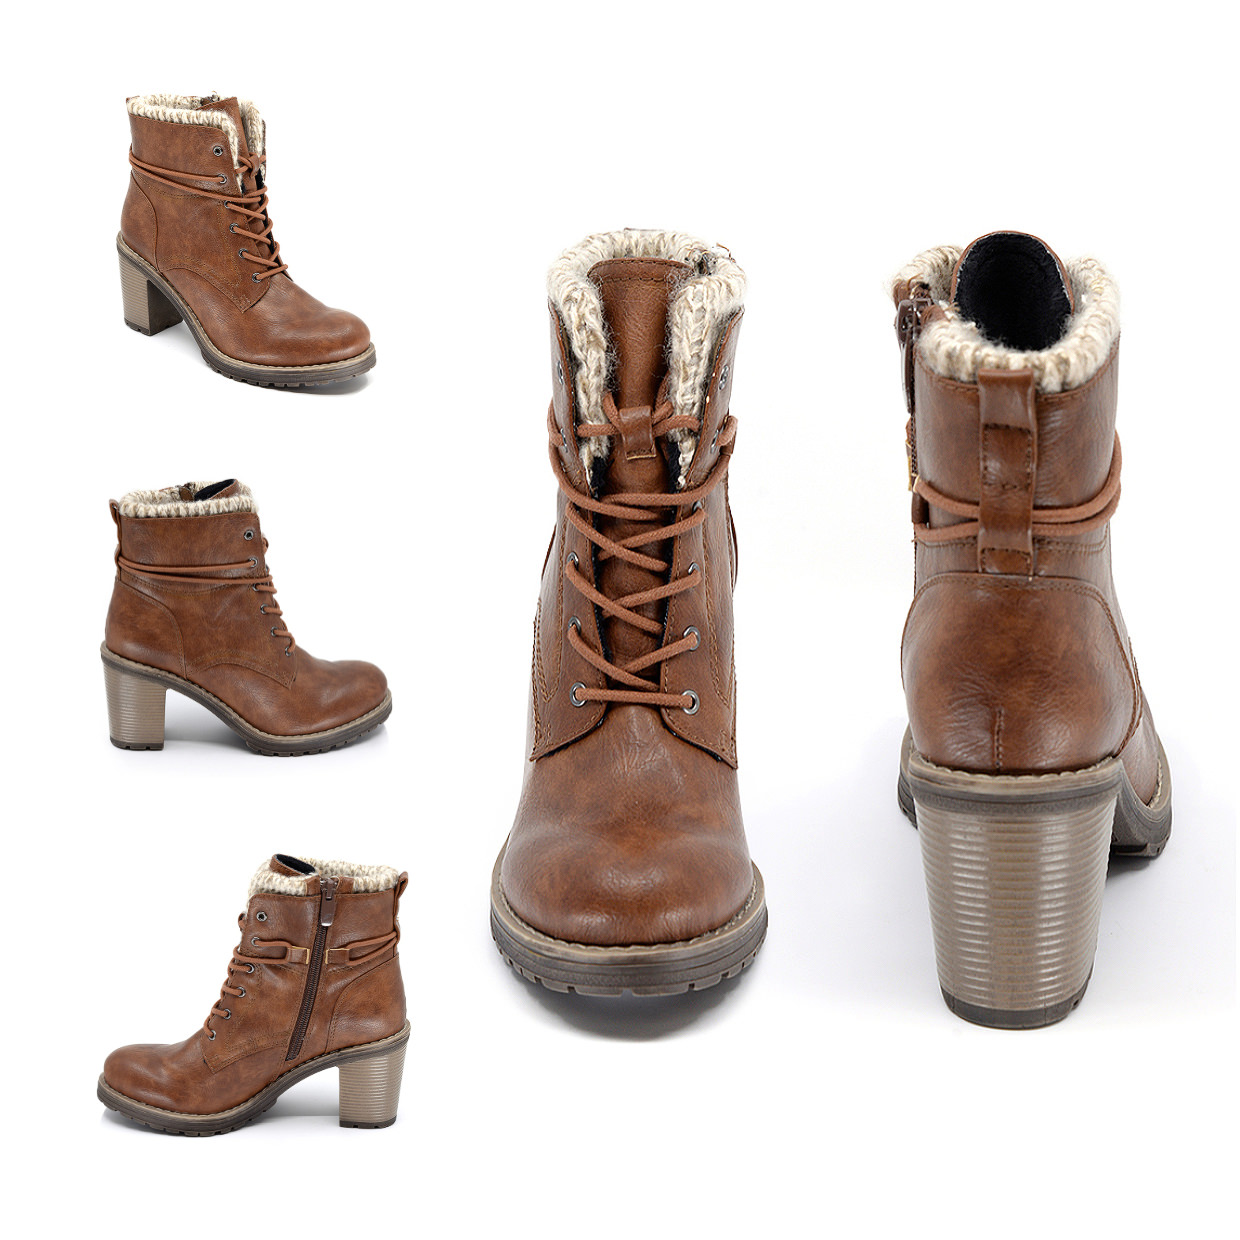 Silver Icing You Be The Buyer: Taxi Boots